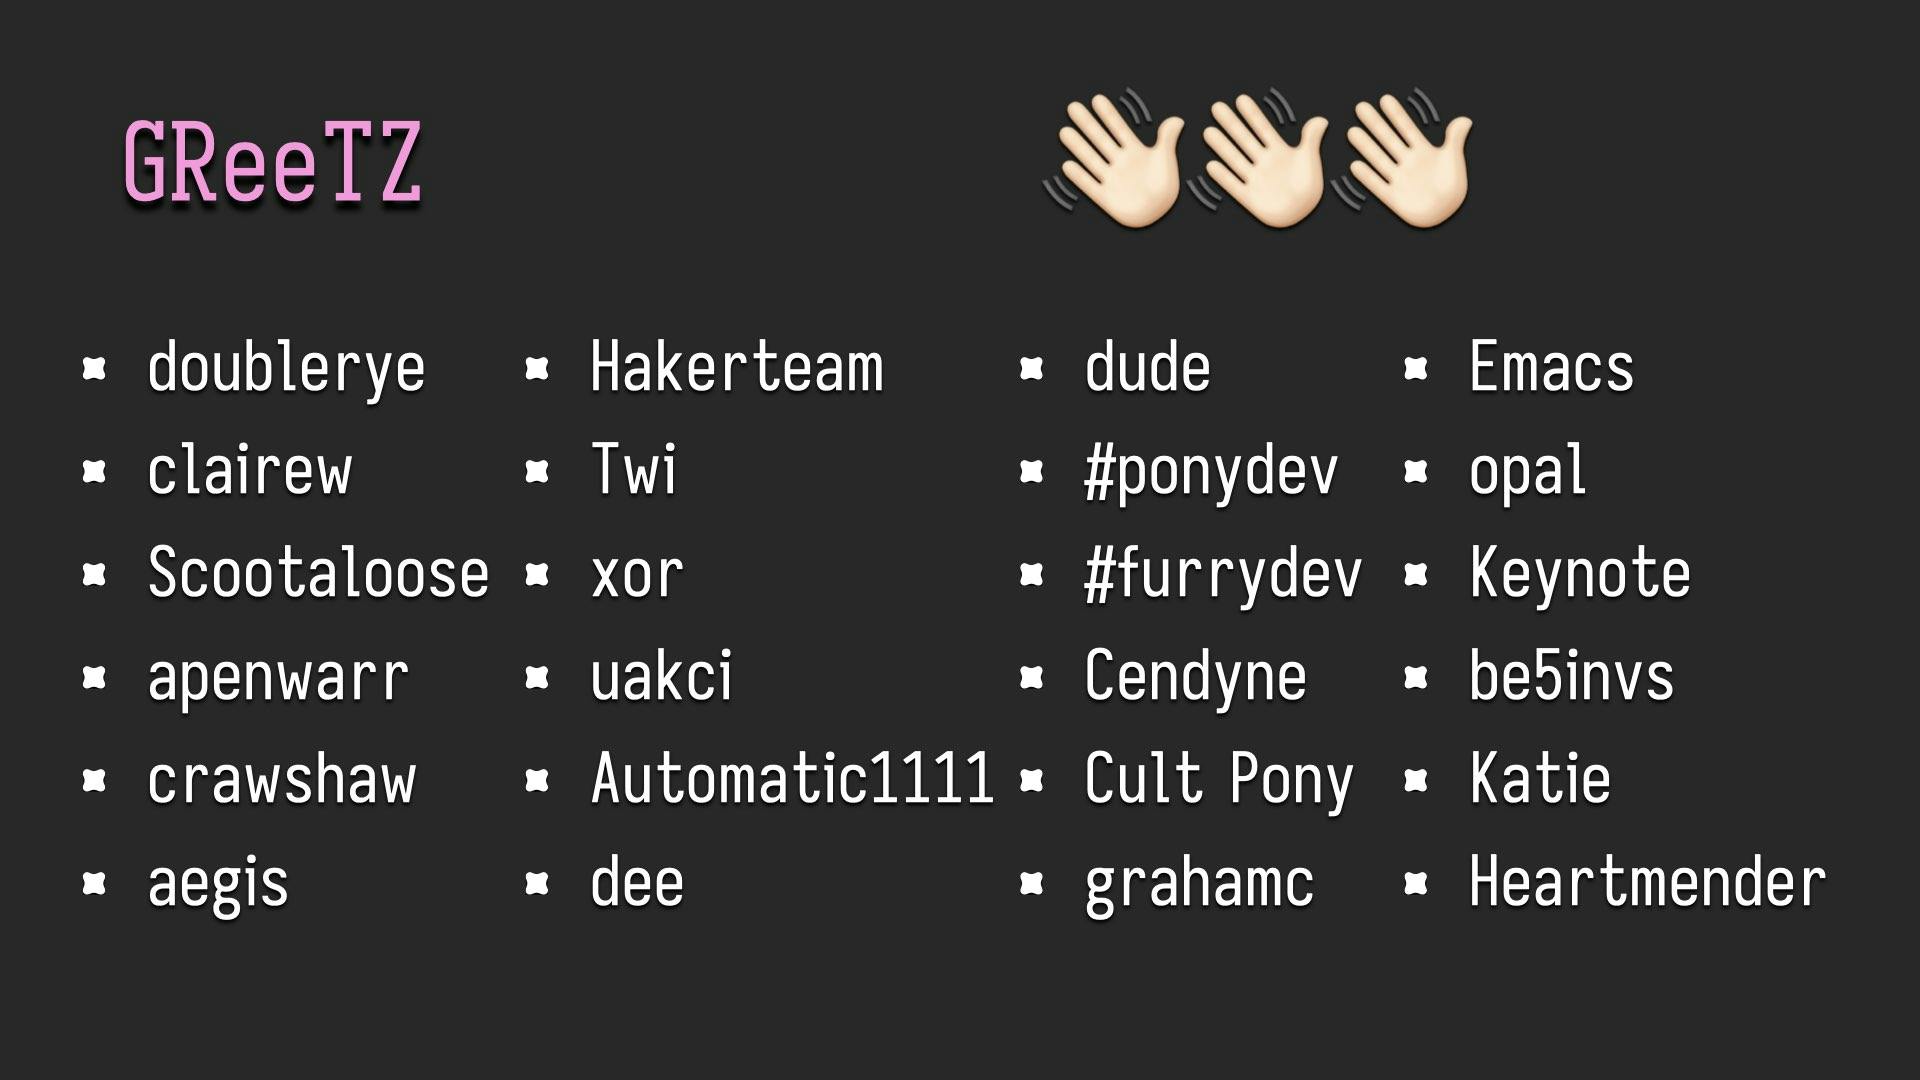 The slide is labeled "GReeTZ" (demoscene slang) and shows a list of all of the people involved in making this talk happen.